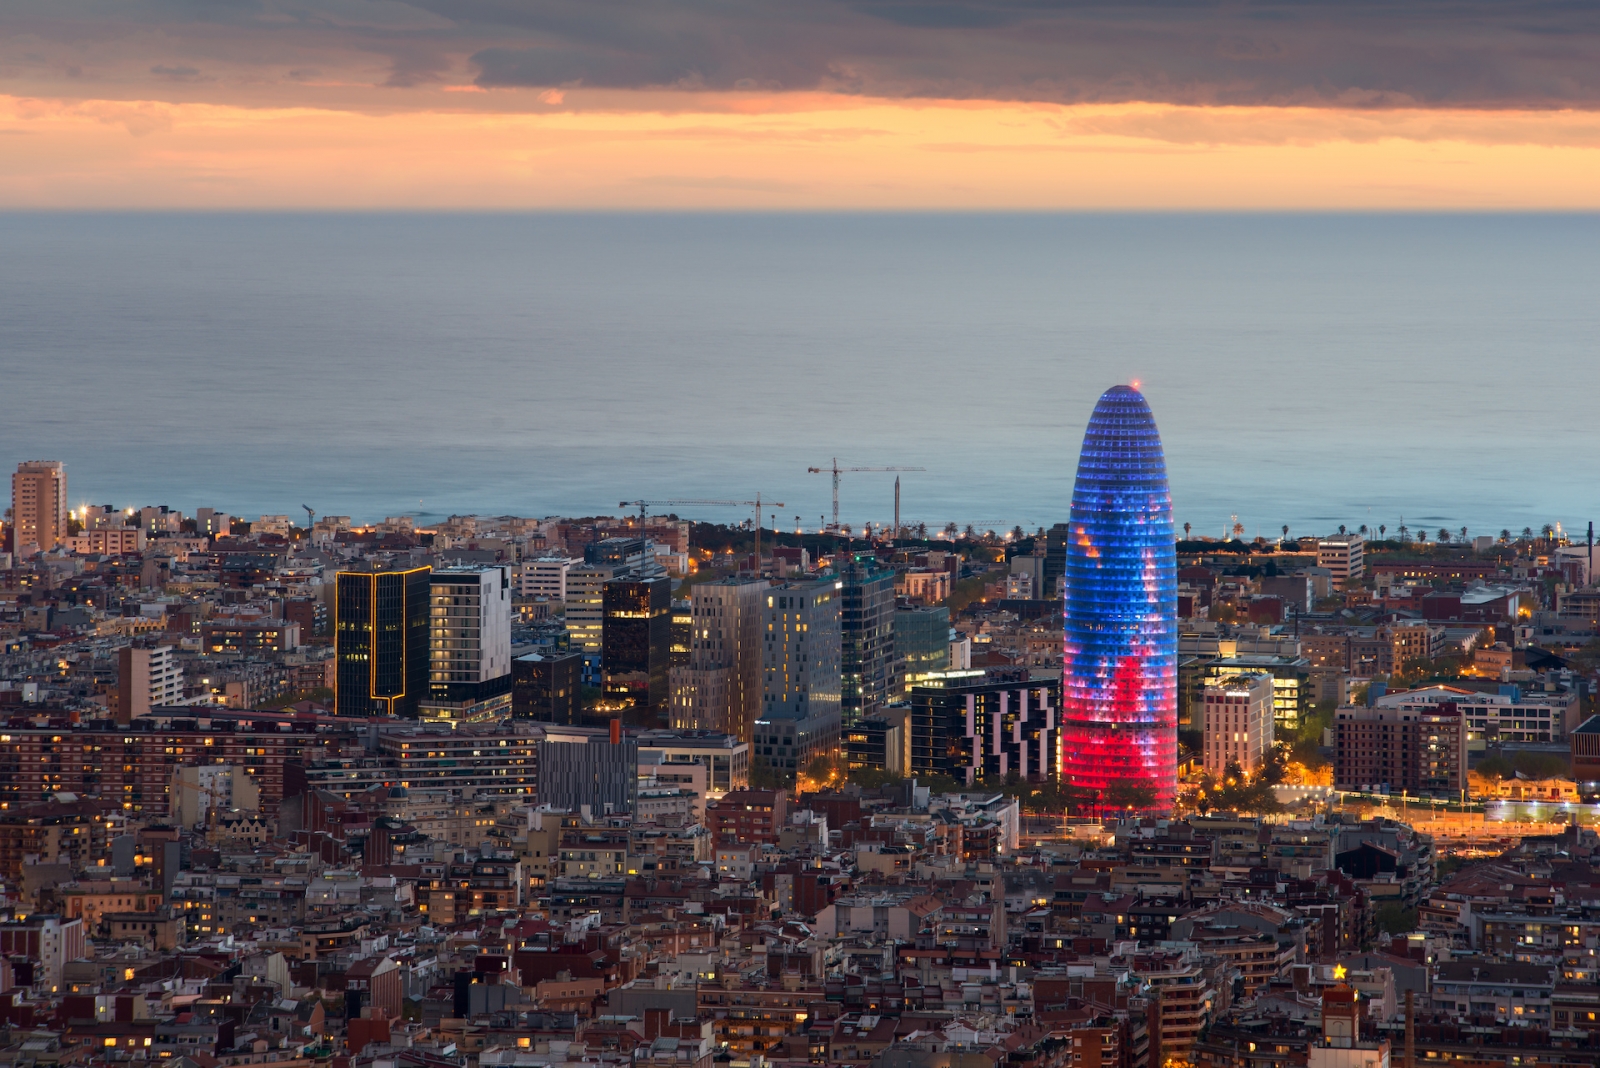 Scenic aerial view of Barcelona city skyscraper and skyline at night in Barcelona, Spain.